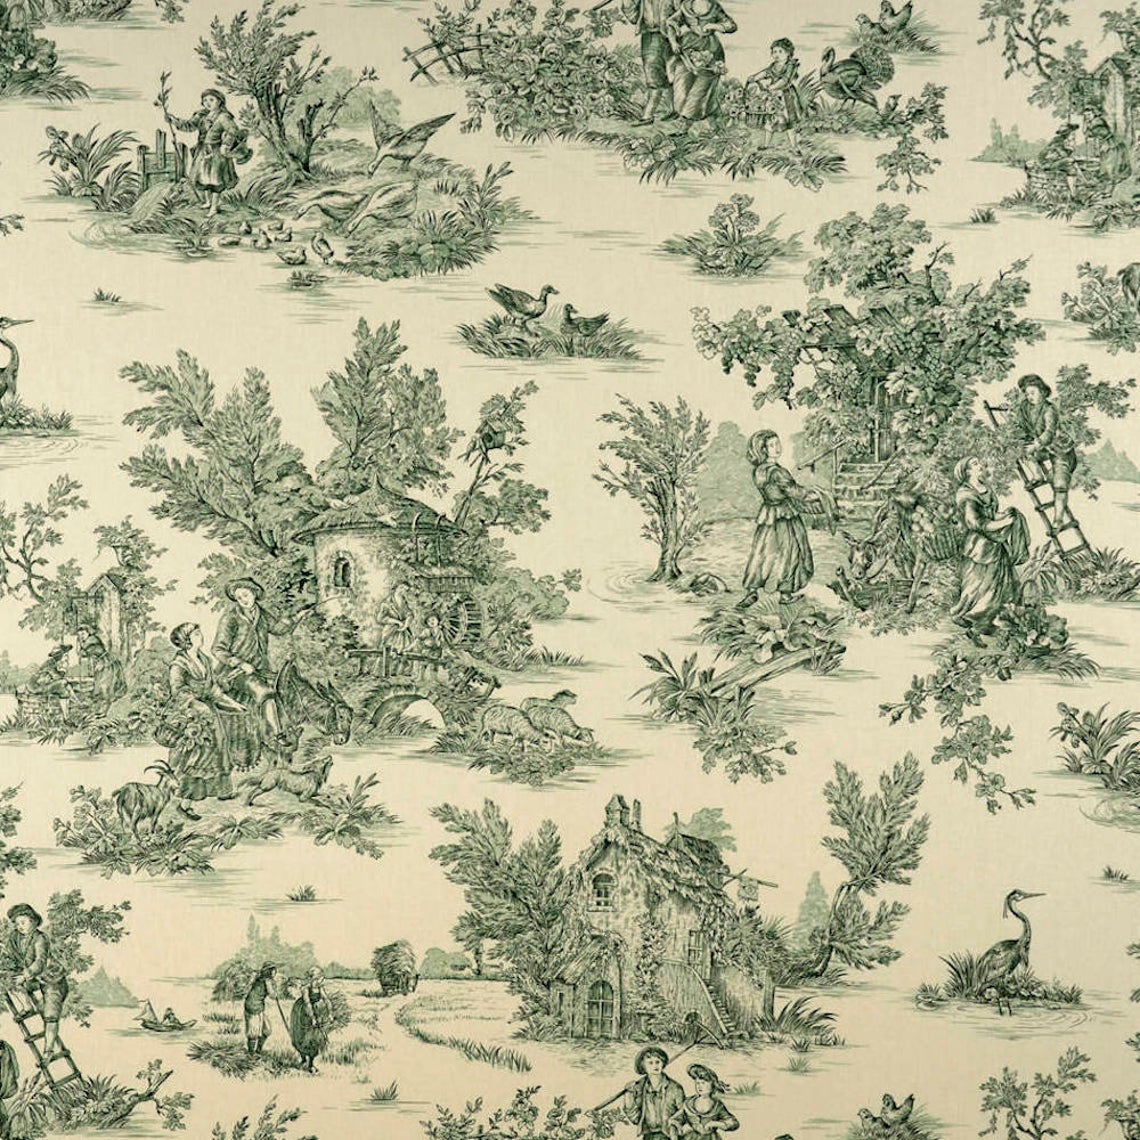 tailored tier cafe curtain panels pair in pastorale #3 green on cream french country toile